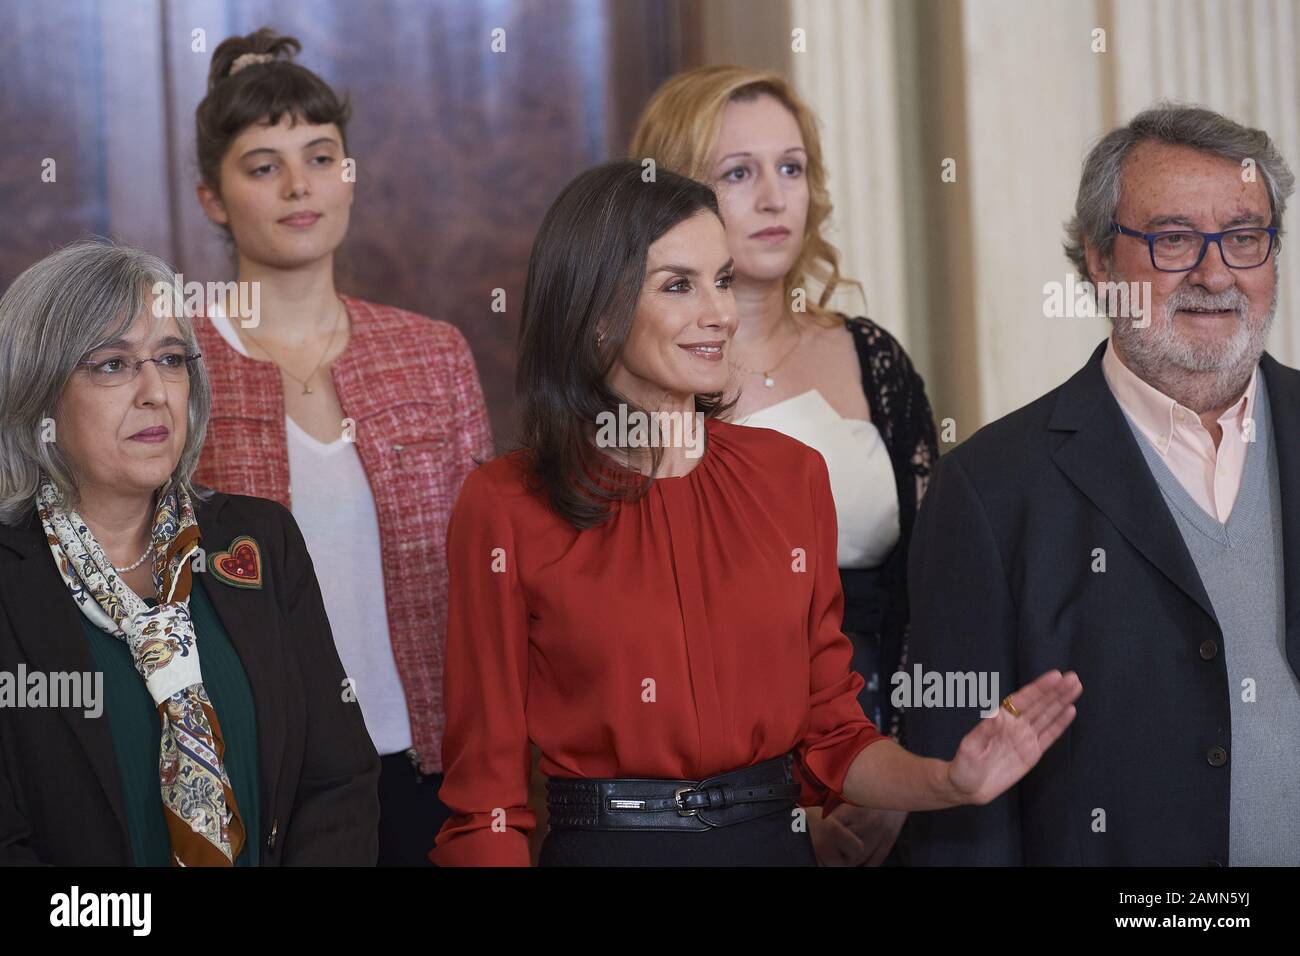 Madrid, Madrid, Spain. 14th Jan, 2020. Queen Letizia of Spain attends an audience to a representation of the 'Fiscal Soledad Cazorla Prieto' Scholarship Fund of the Women Foundation at Zarzuela Palace on January 14, 2020 in Madrid, Spain Credit: Jack Abuin/ZUMA Wire/Alamy Live News Stock Photo